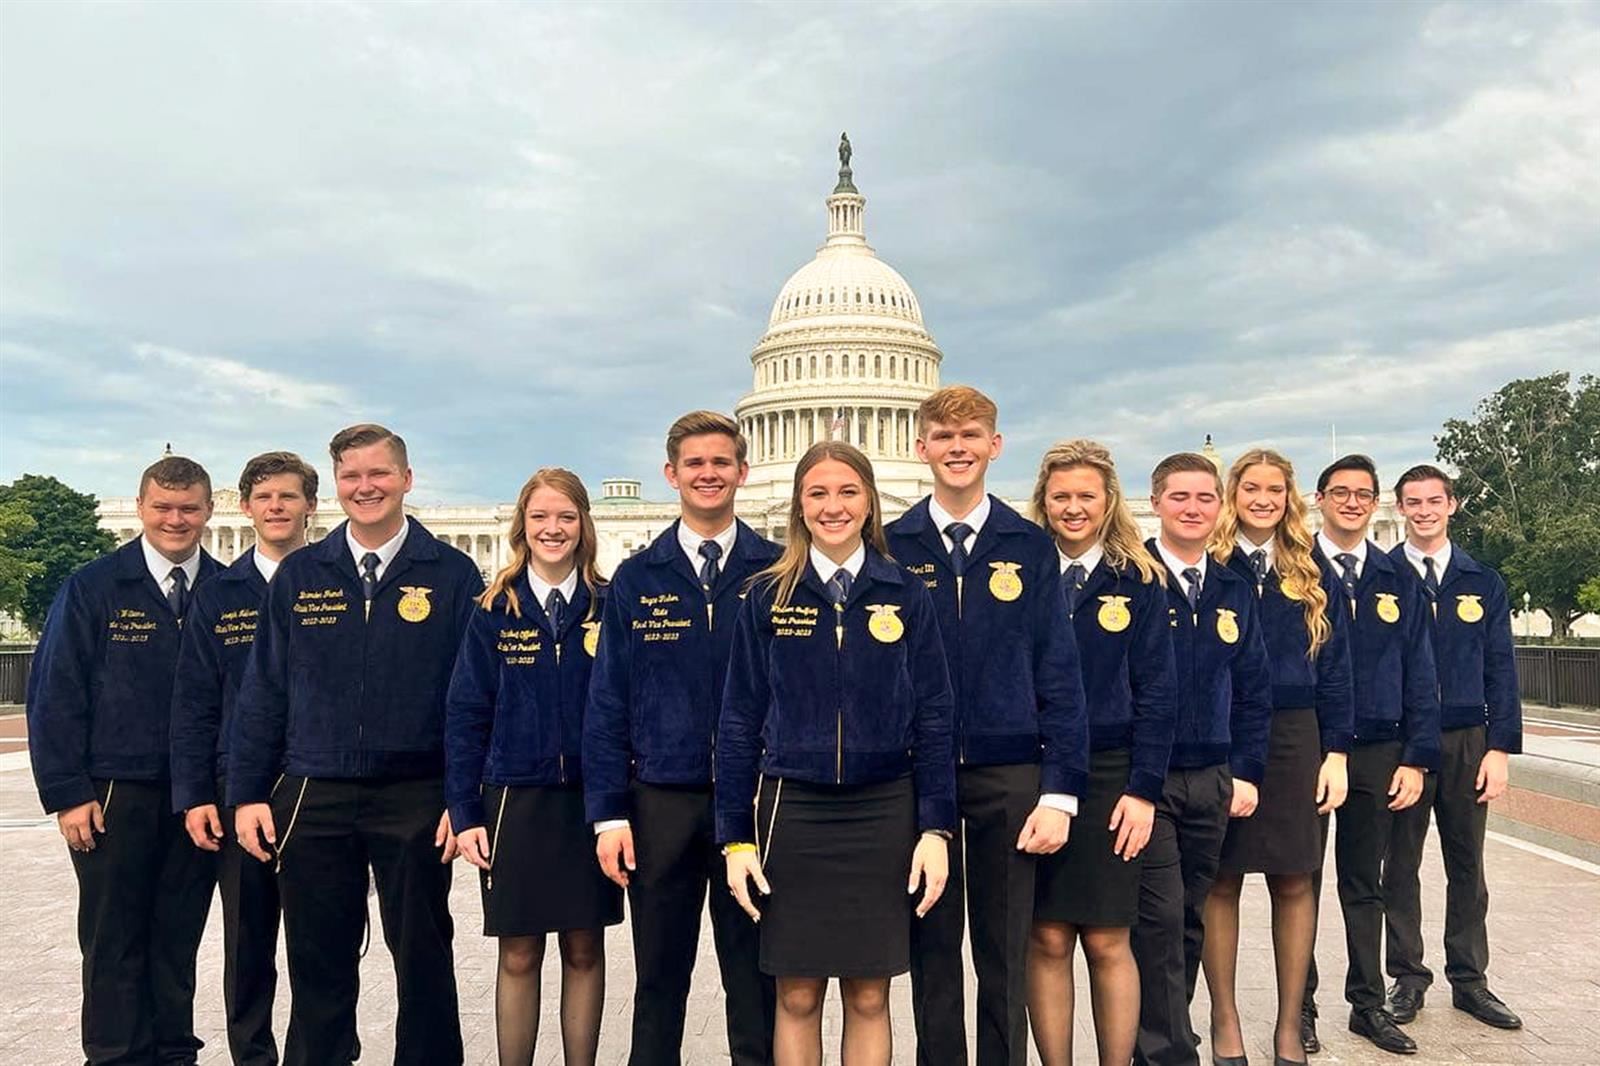 Among the early duties for the 12 state officers for the Texas FFA Association included traveling to Washington D.C.